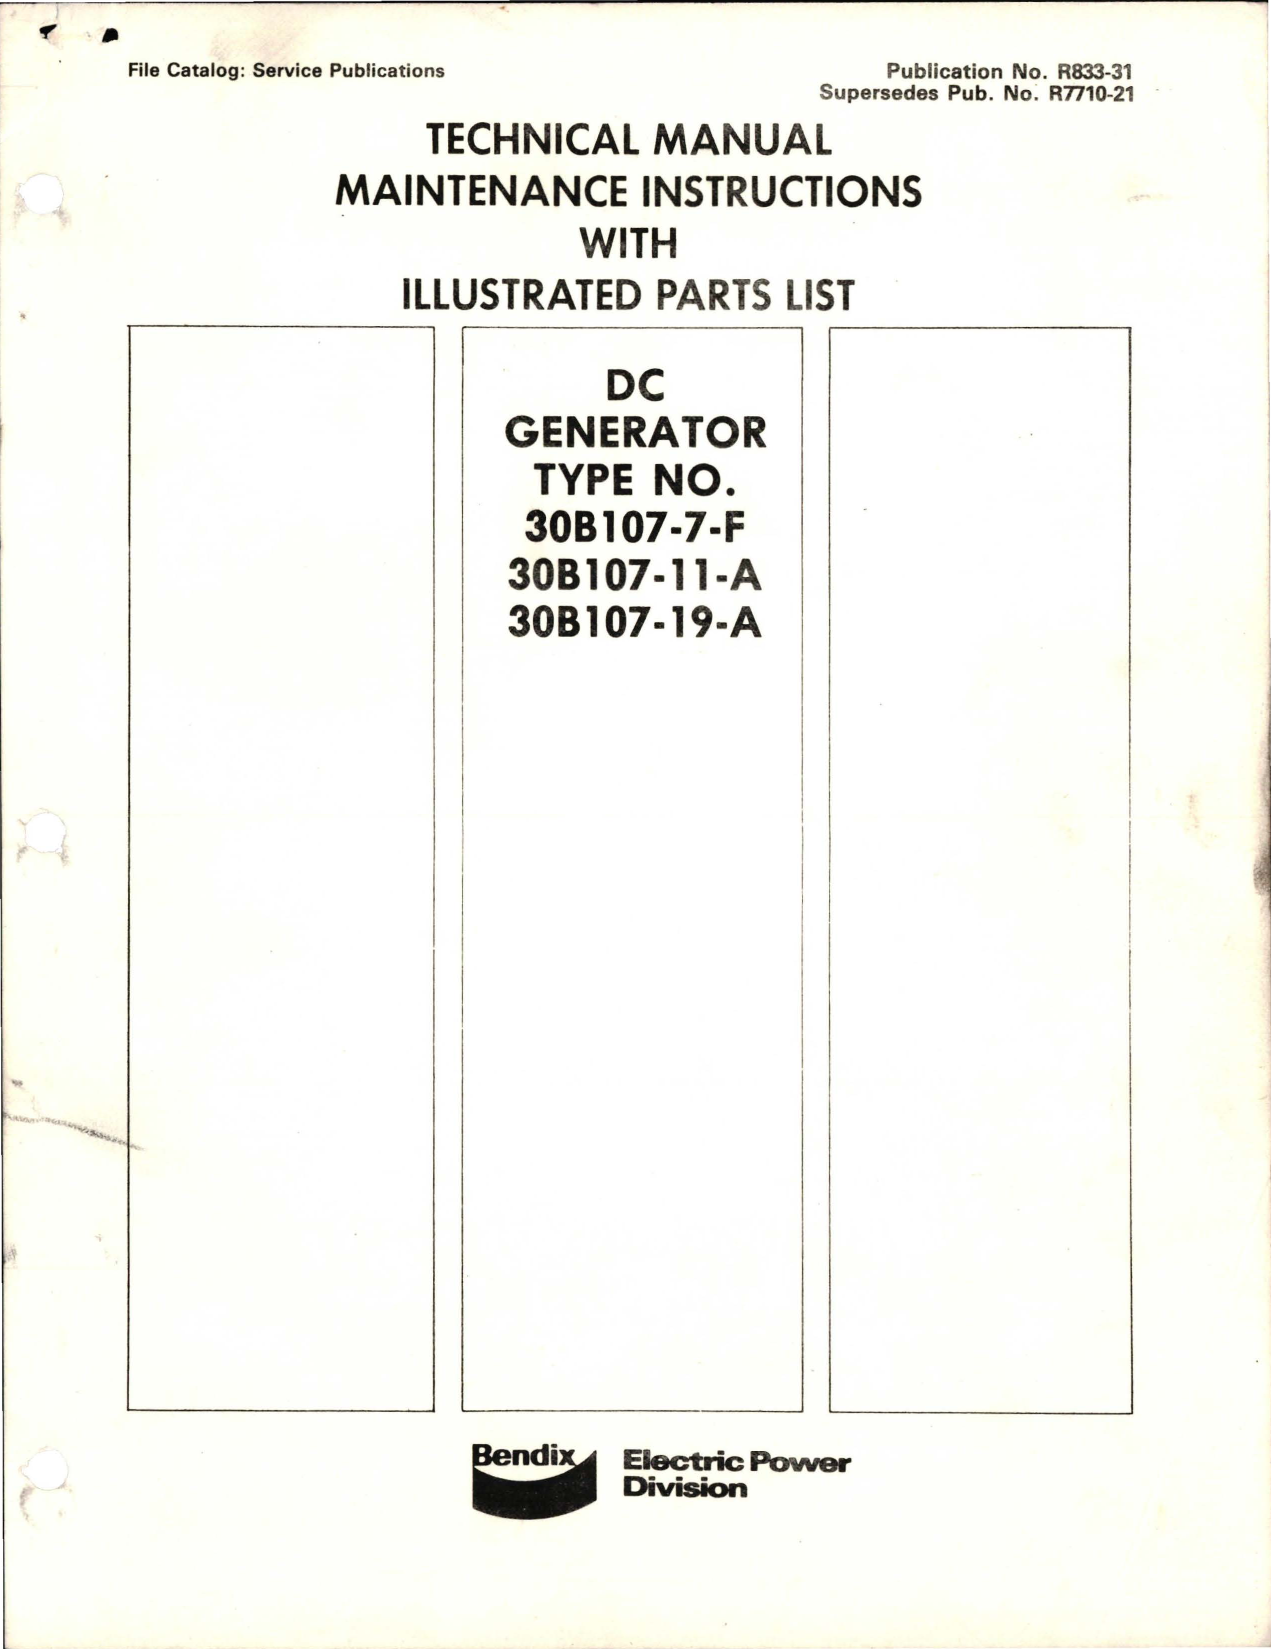 Sample page 1 from AirCorps Library document: Maintenance Instructions with Illustrated Parts List for DC Generator - Types 30B107-7-F, 30B107-11-A, and 30B107-19-A